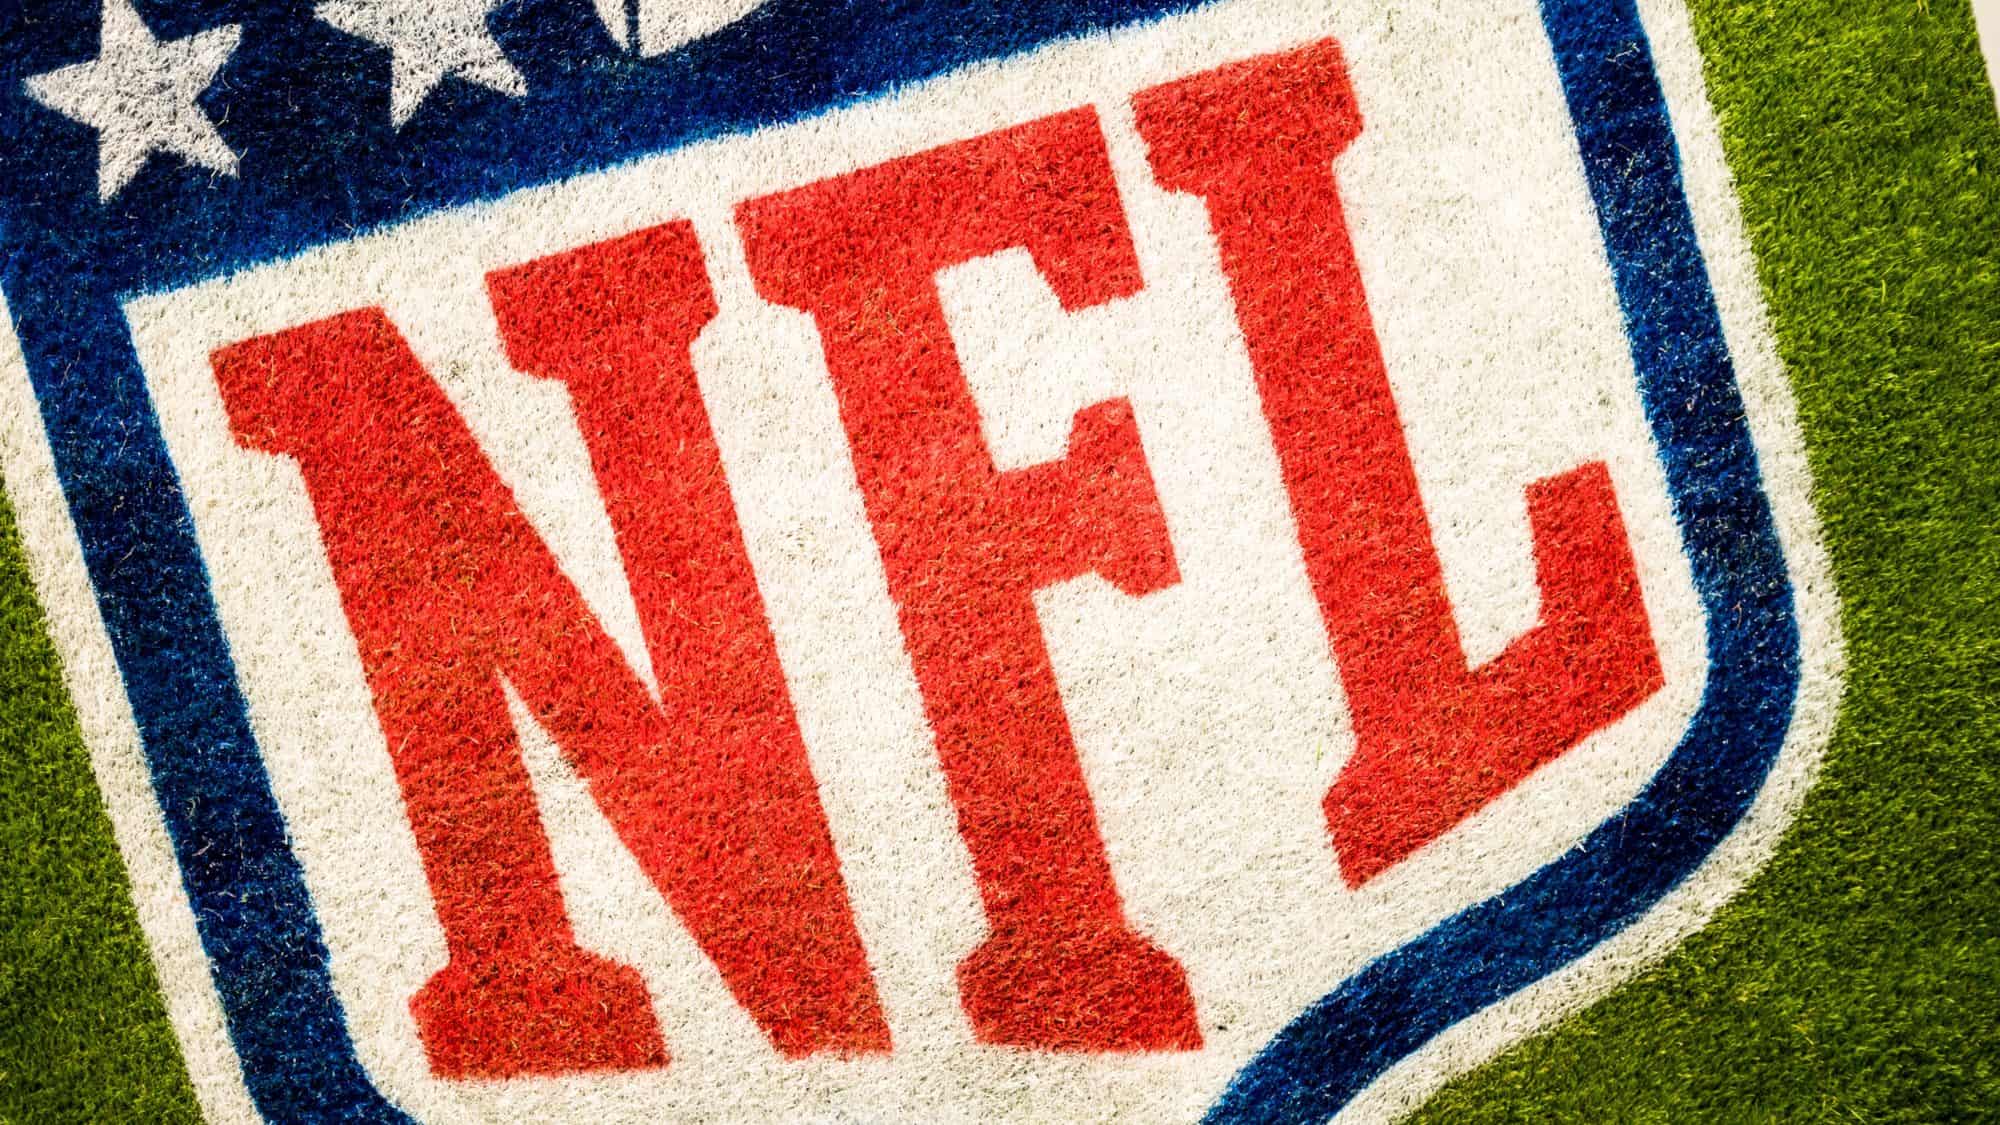 NFL logo painted on field